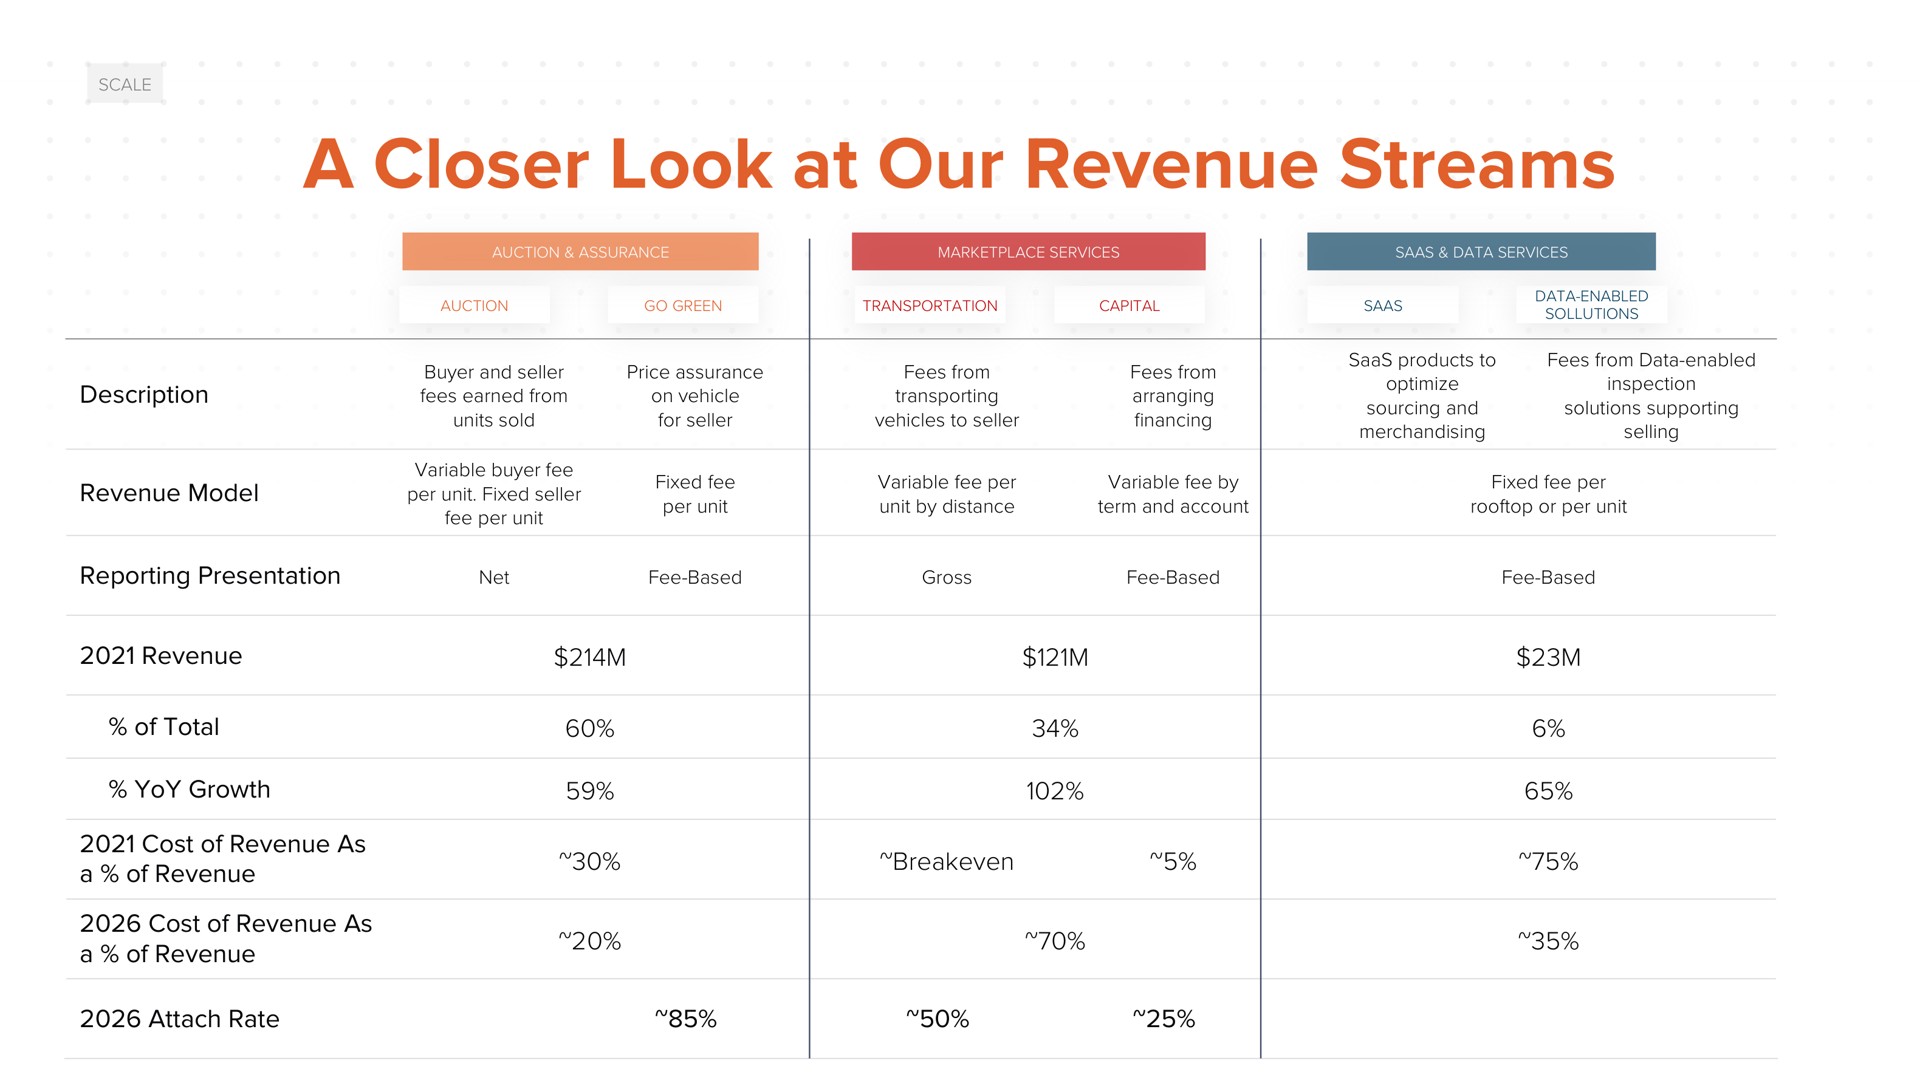 a closer look at our revenue streams | ACV Auctions